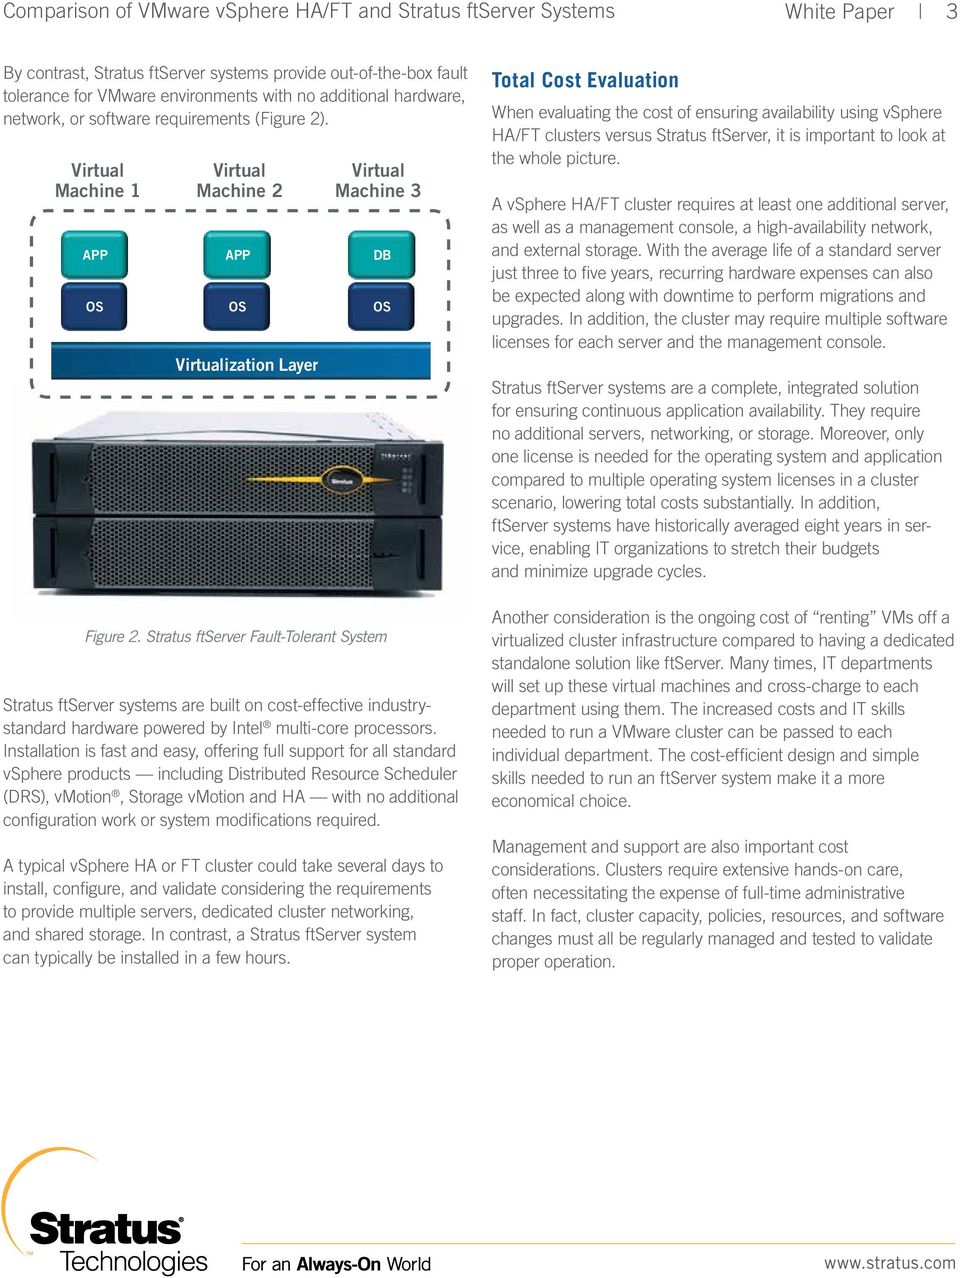 Stratus ftserver Fault-Tolerant System Stratus ftserver systems are built on cost-effective industrystandard hardware powered by Intel multi-core processors.